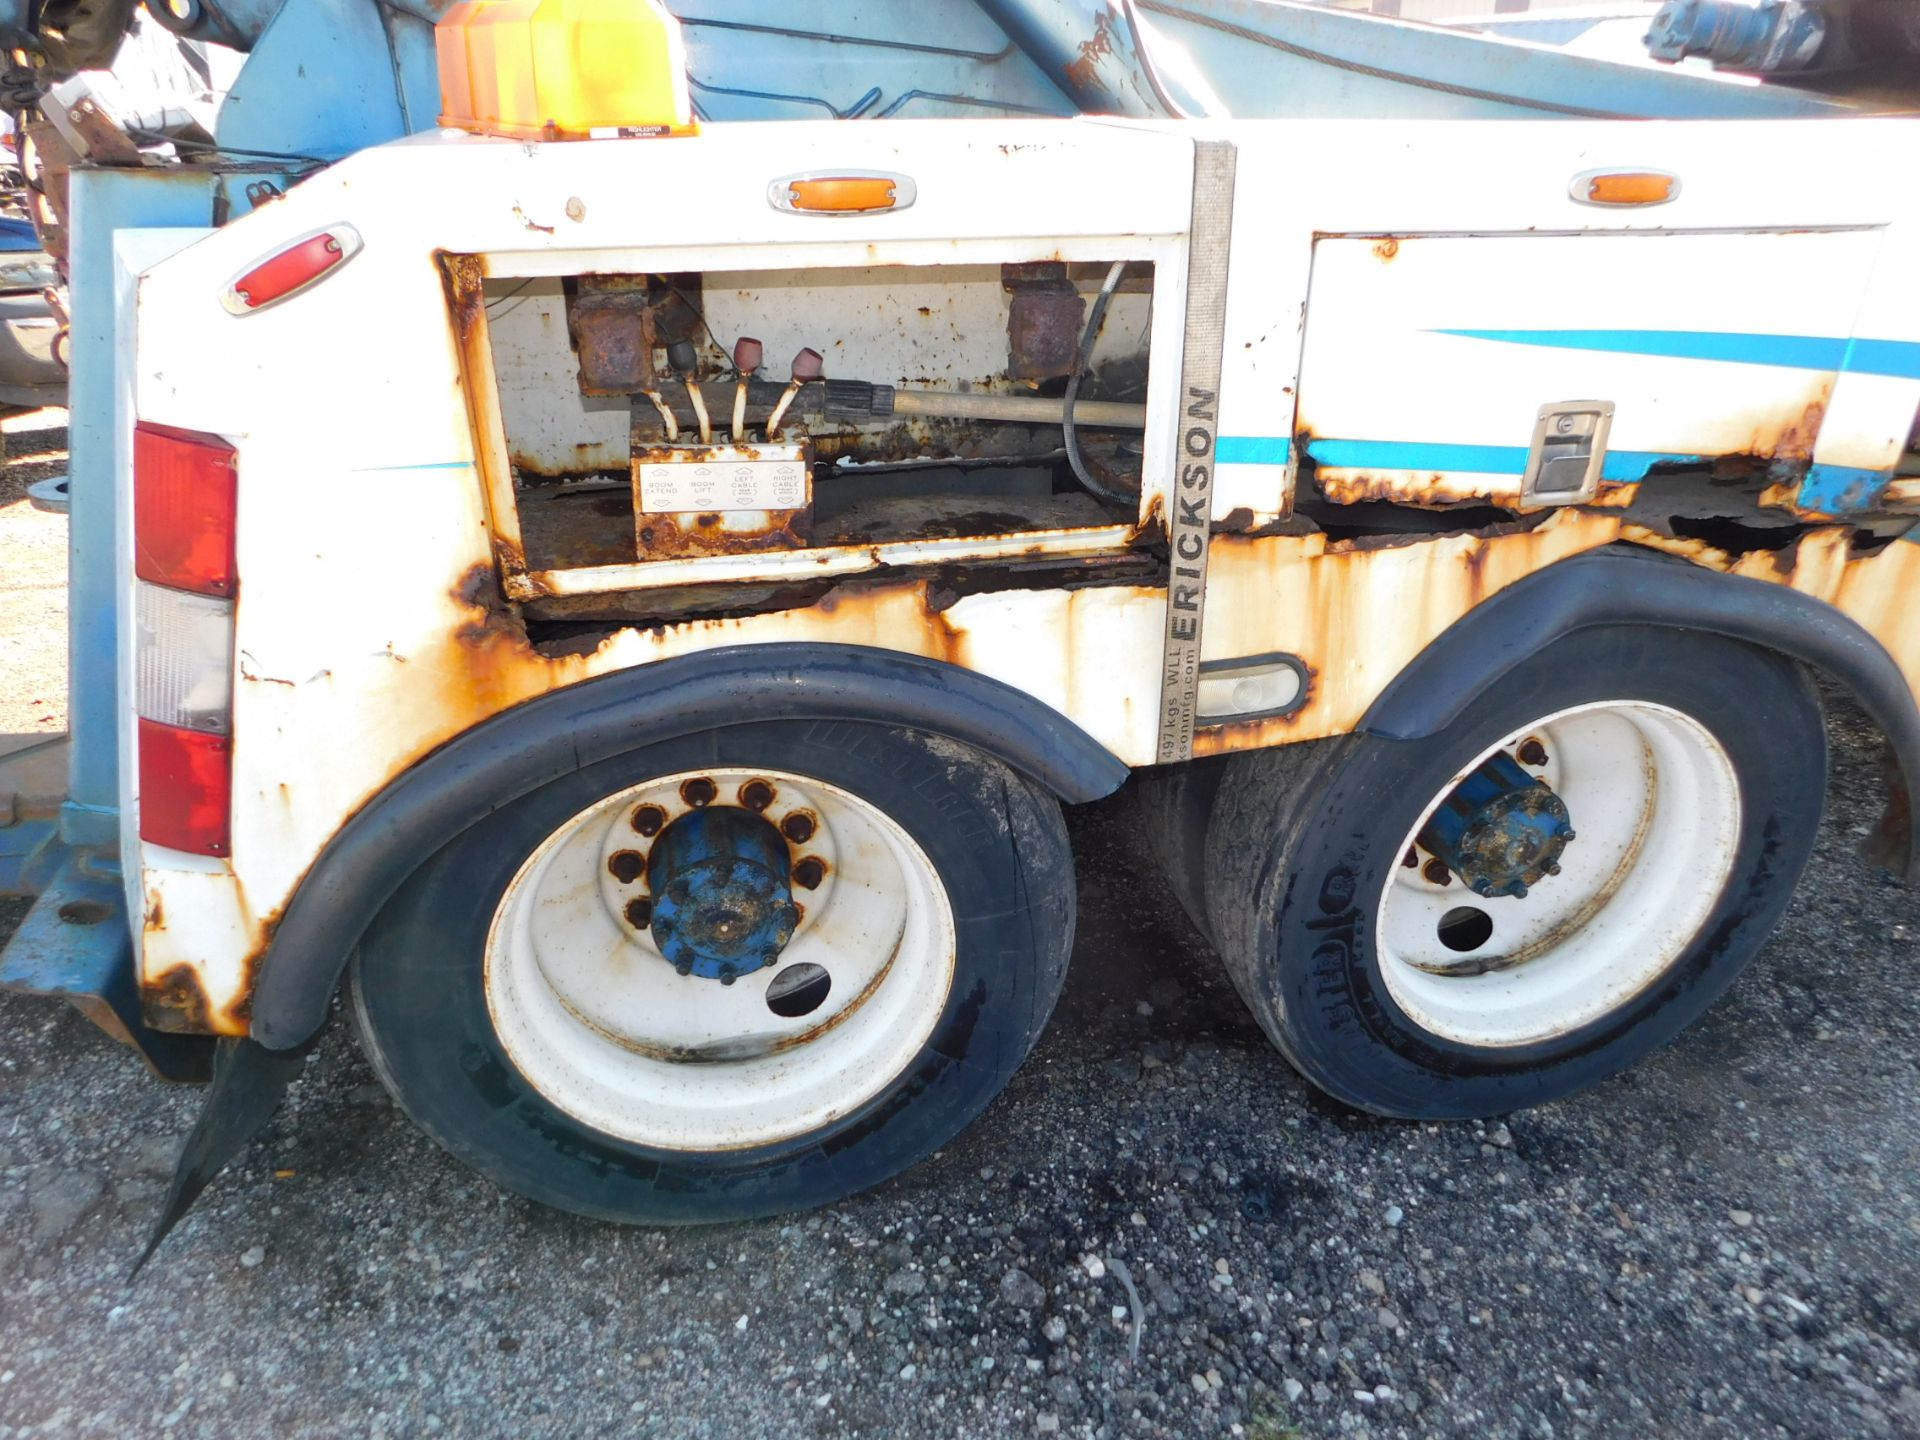 1989 WHITE Volvo GMC Aero Series 60 Heavy Duty Tow Truck, 329,000 miles showing on Odometer, Detroit - Image 7 of 28